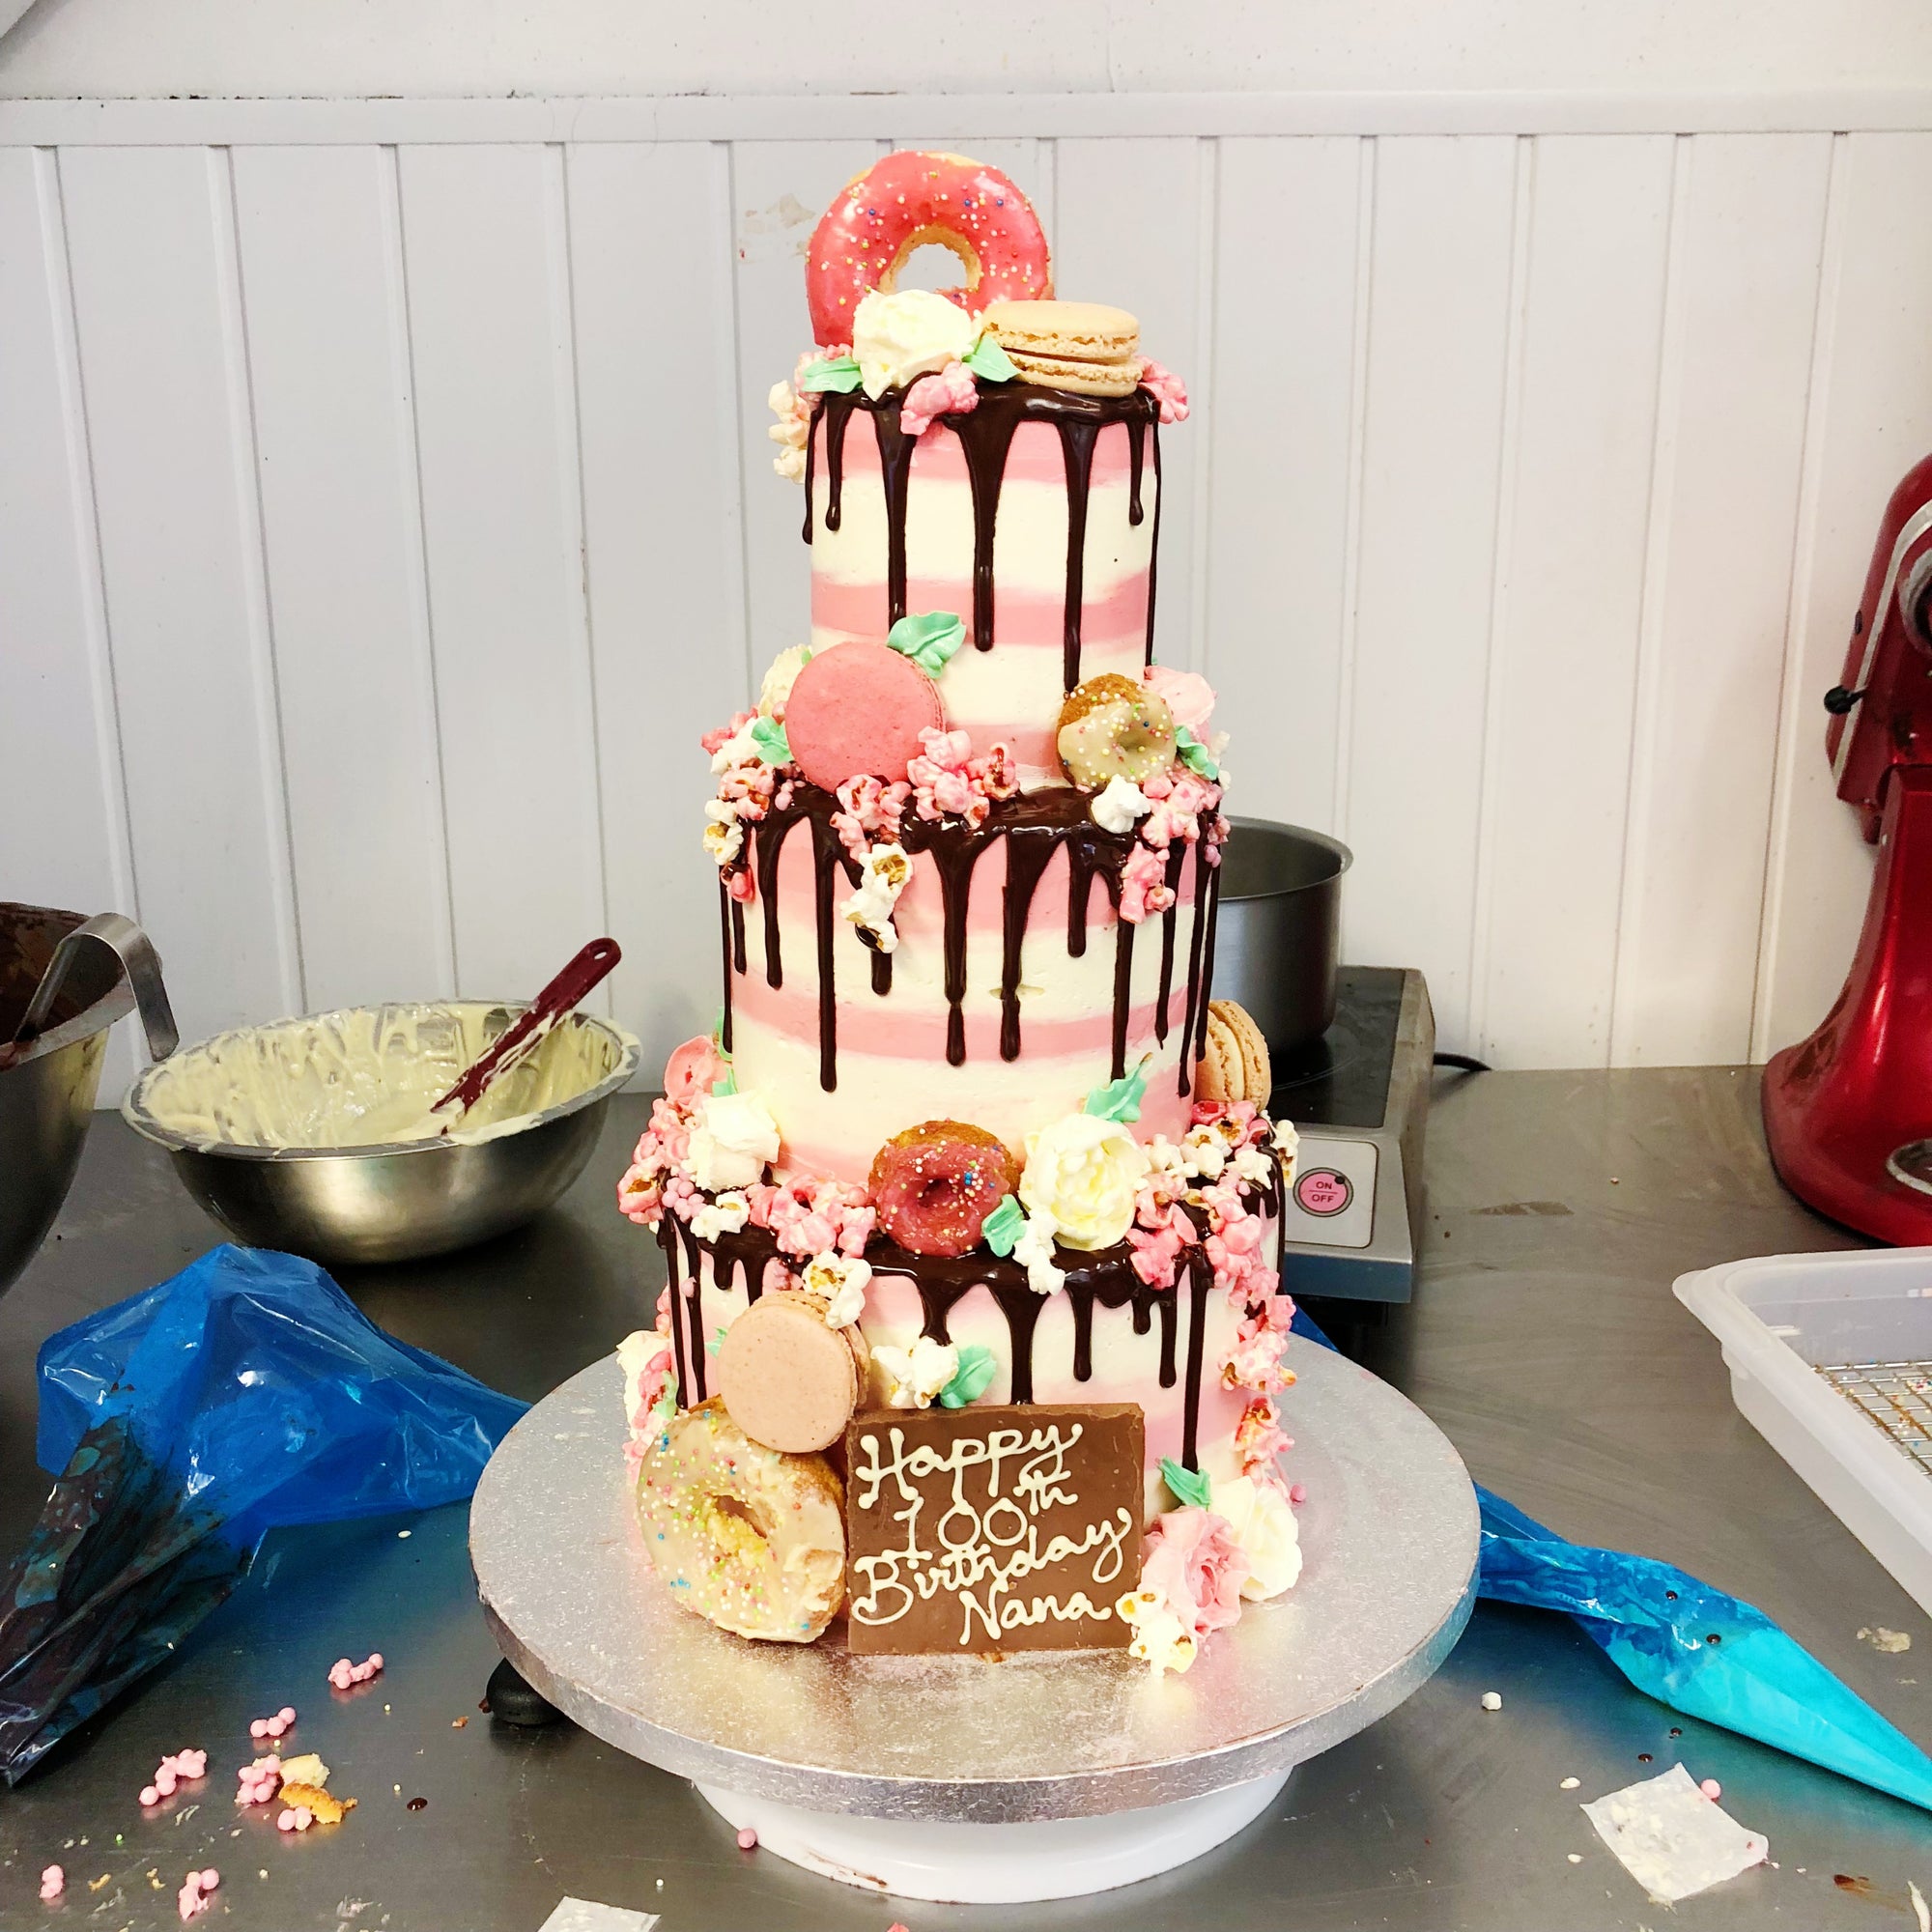 Baking a Spectacular 100th Birthday Cake Surprise!